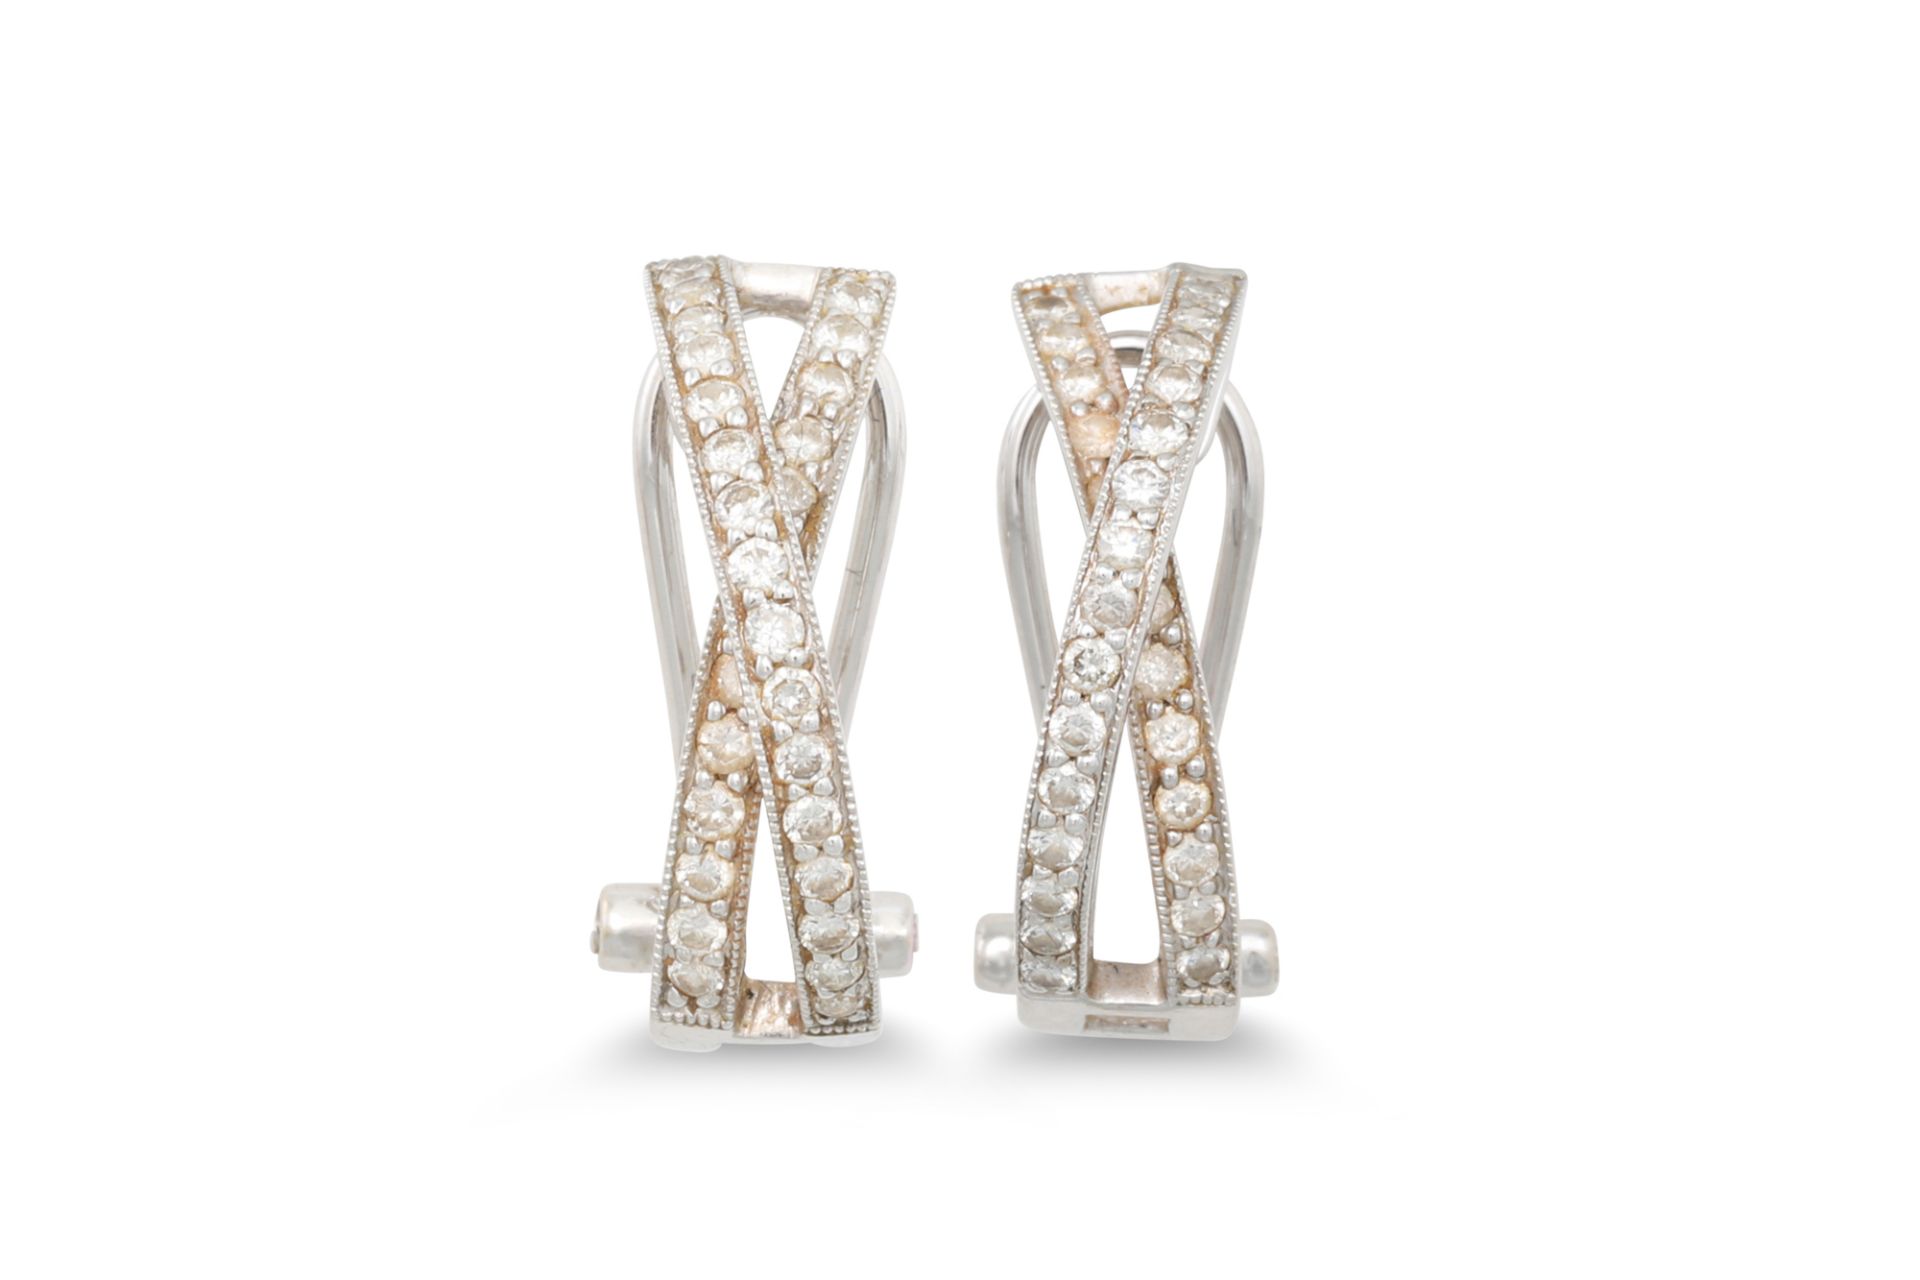 A PAIR OF DIAMOND SET EARRINGS, modern cross over design, mounted in 18ct white gold